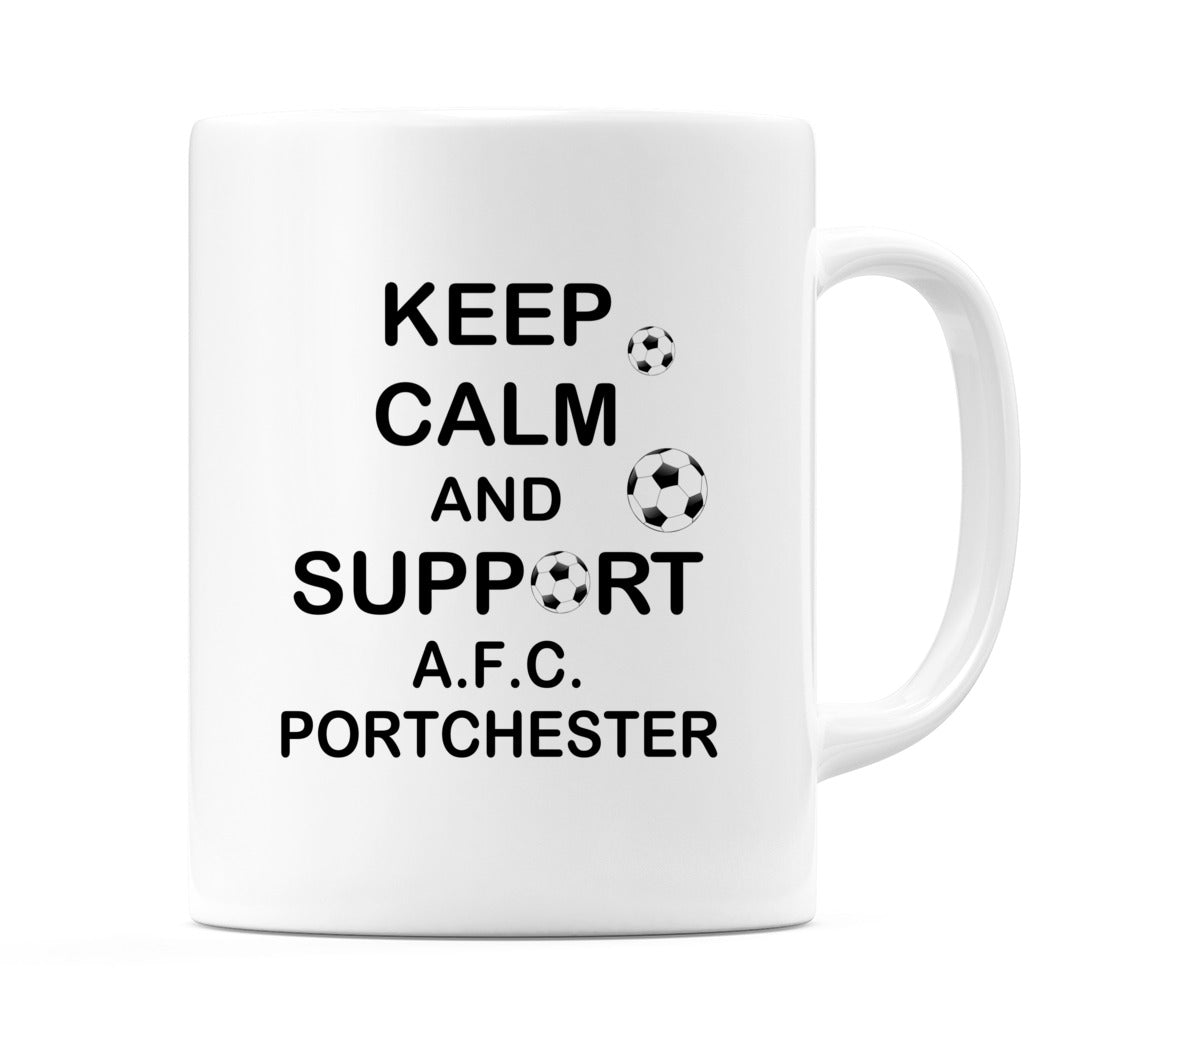 Keep Calm And Support A.F.C. Portchester Mug